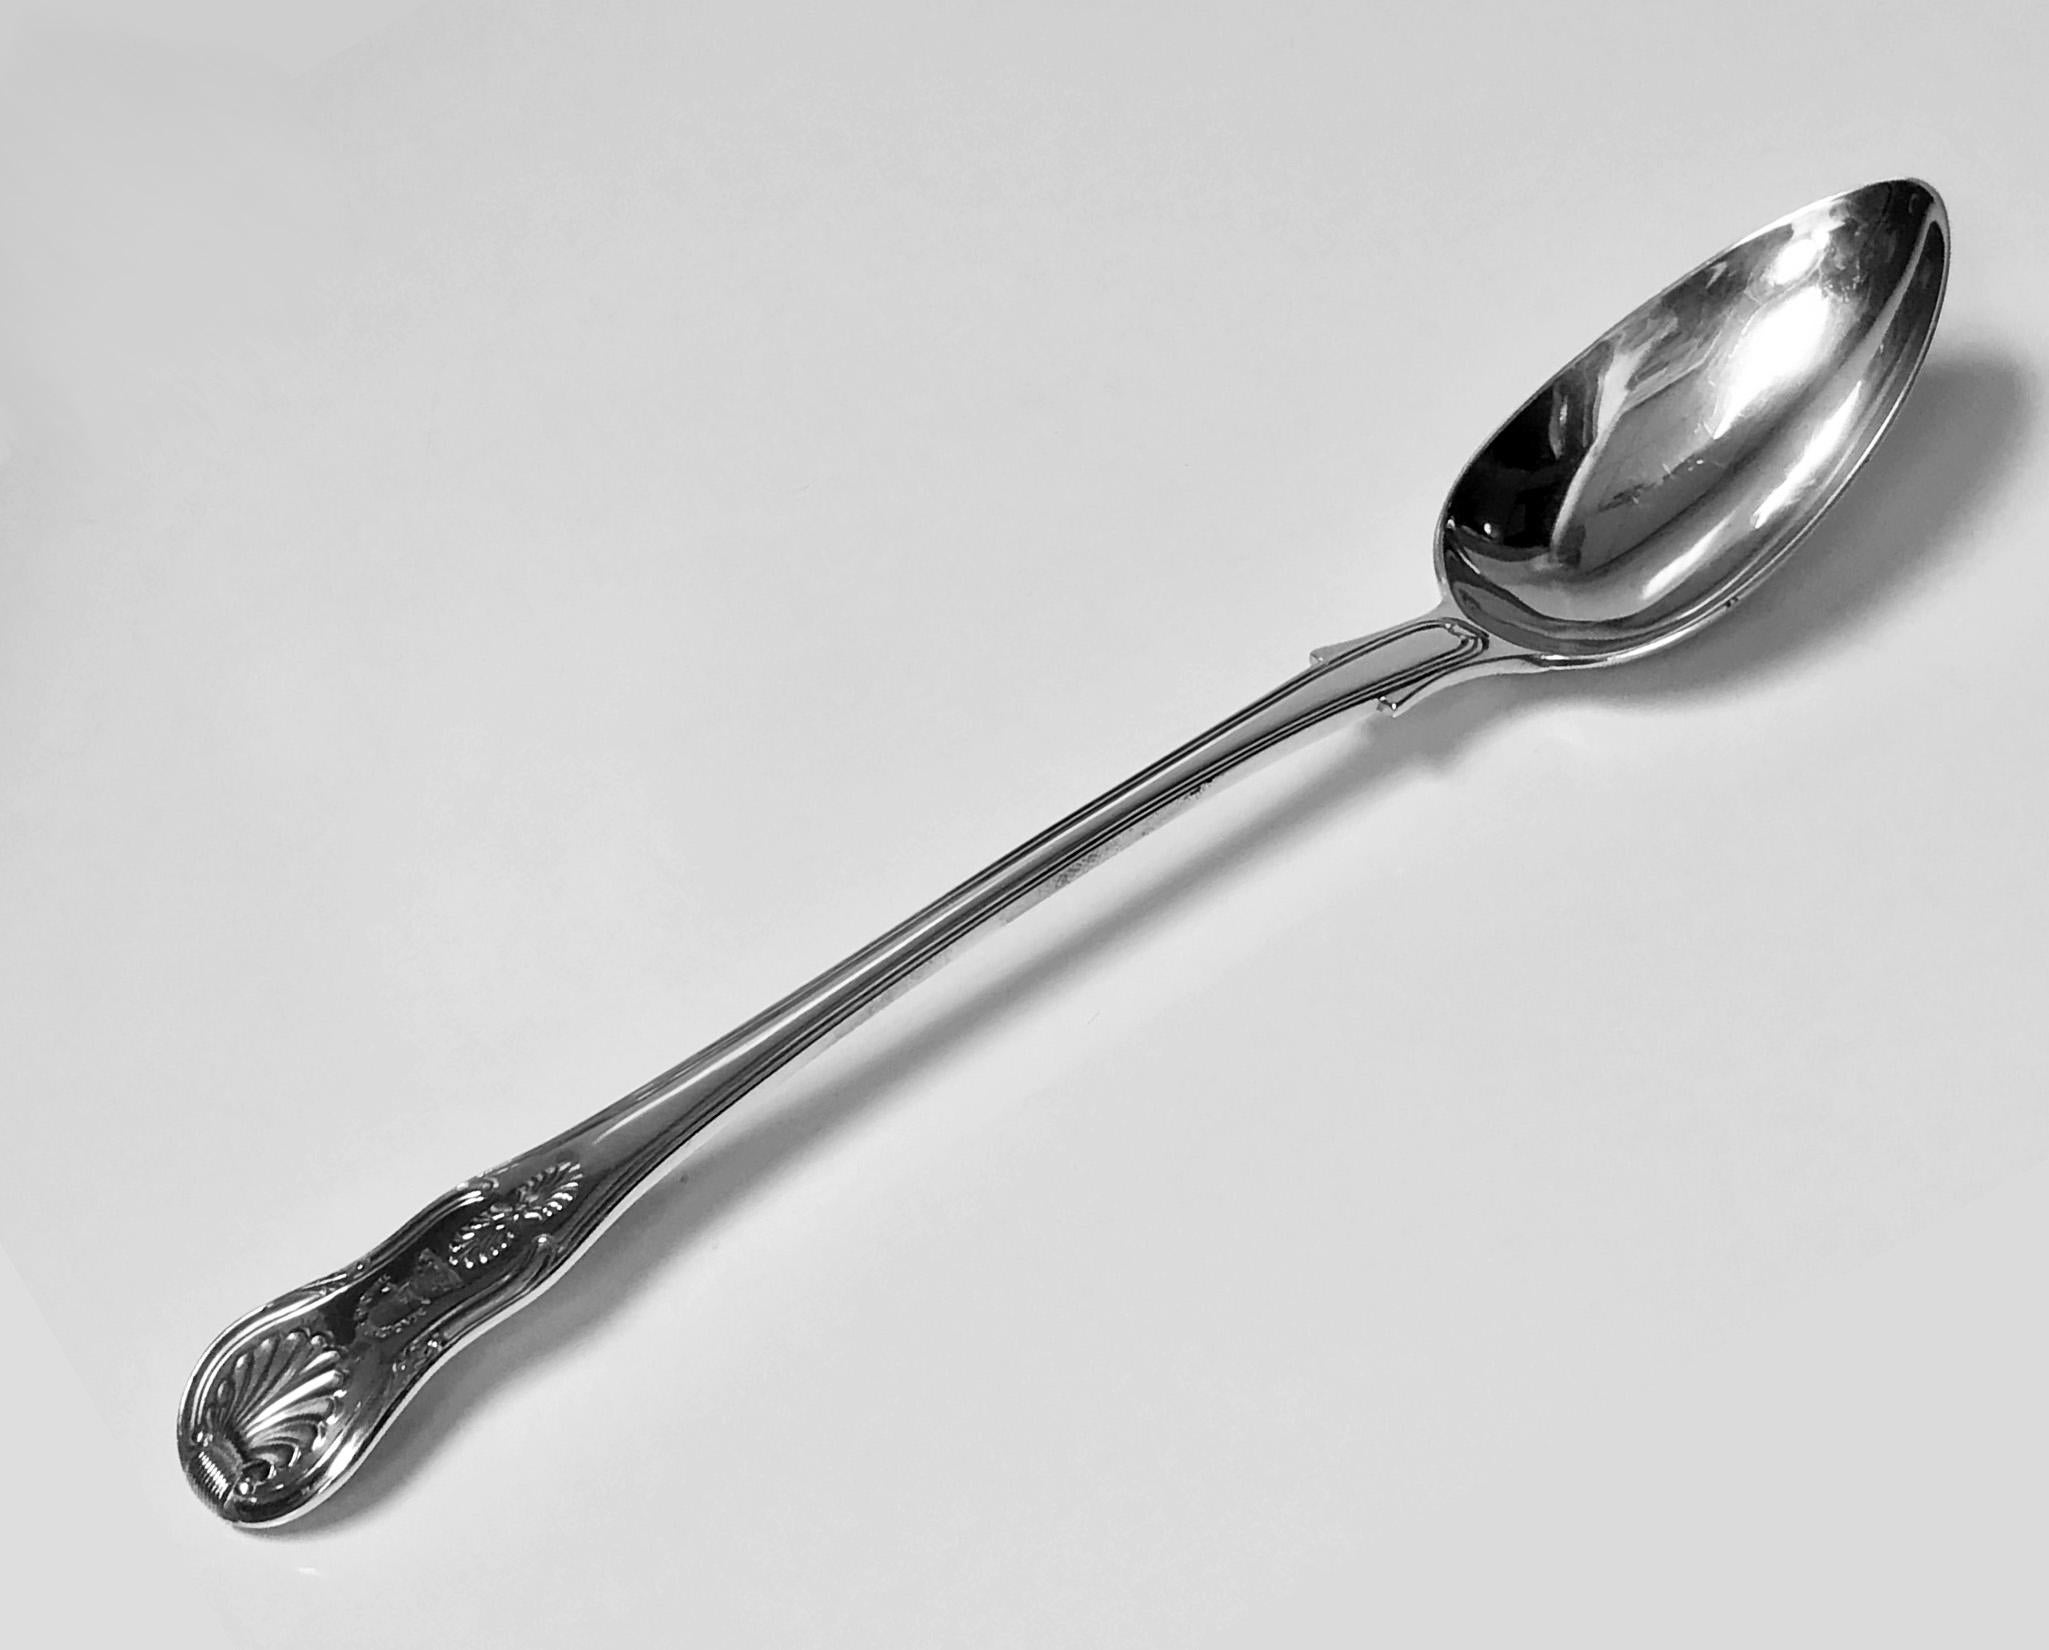 Antique Georgian silver kings pattern serving basting spoon, London, 1817, William Bateman. Crest and Motto for Gordon. Dexter hand issuing out of a cloud holding a dart, Motto, Majores Sequor, I follow our ancestors. Substantial weight and quality.